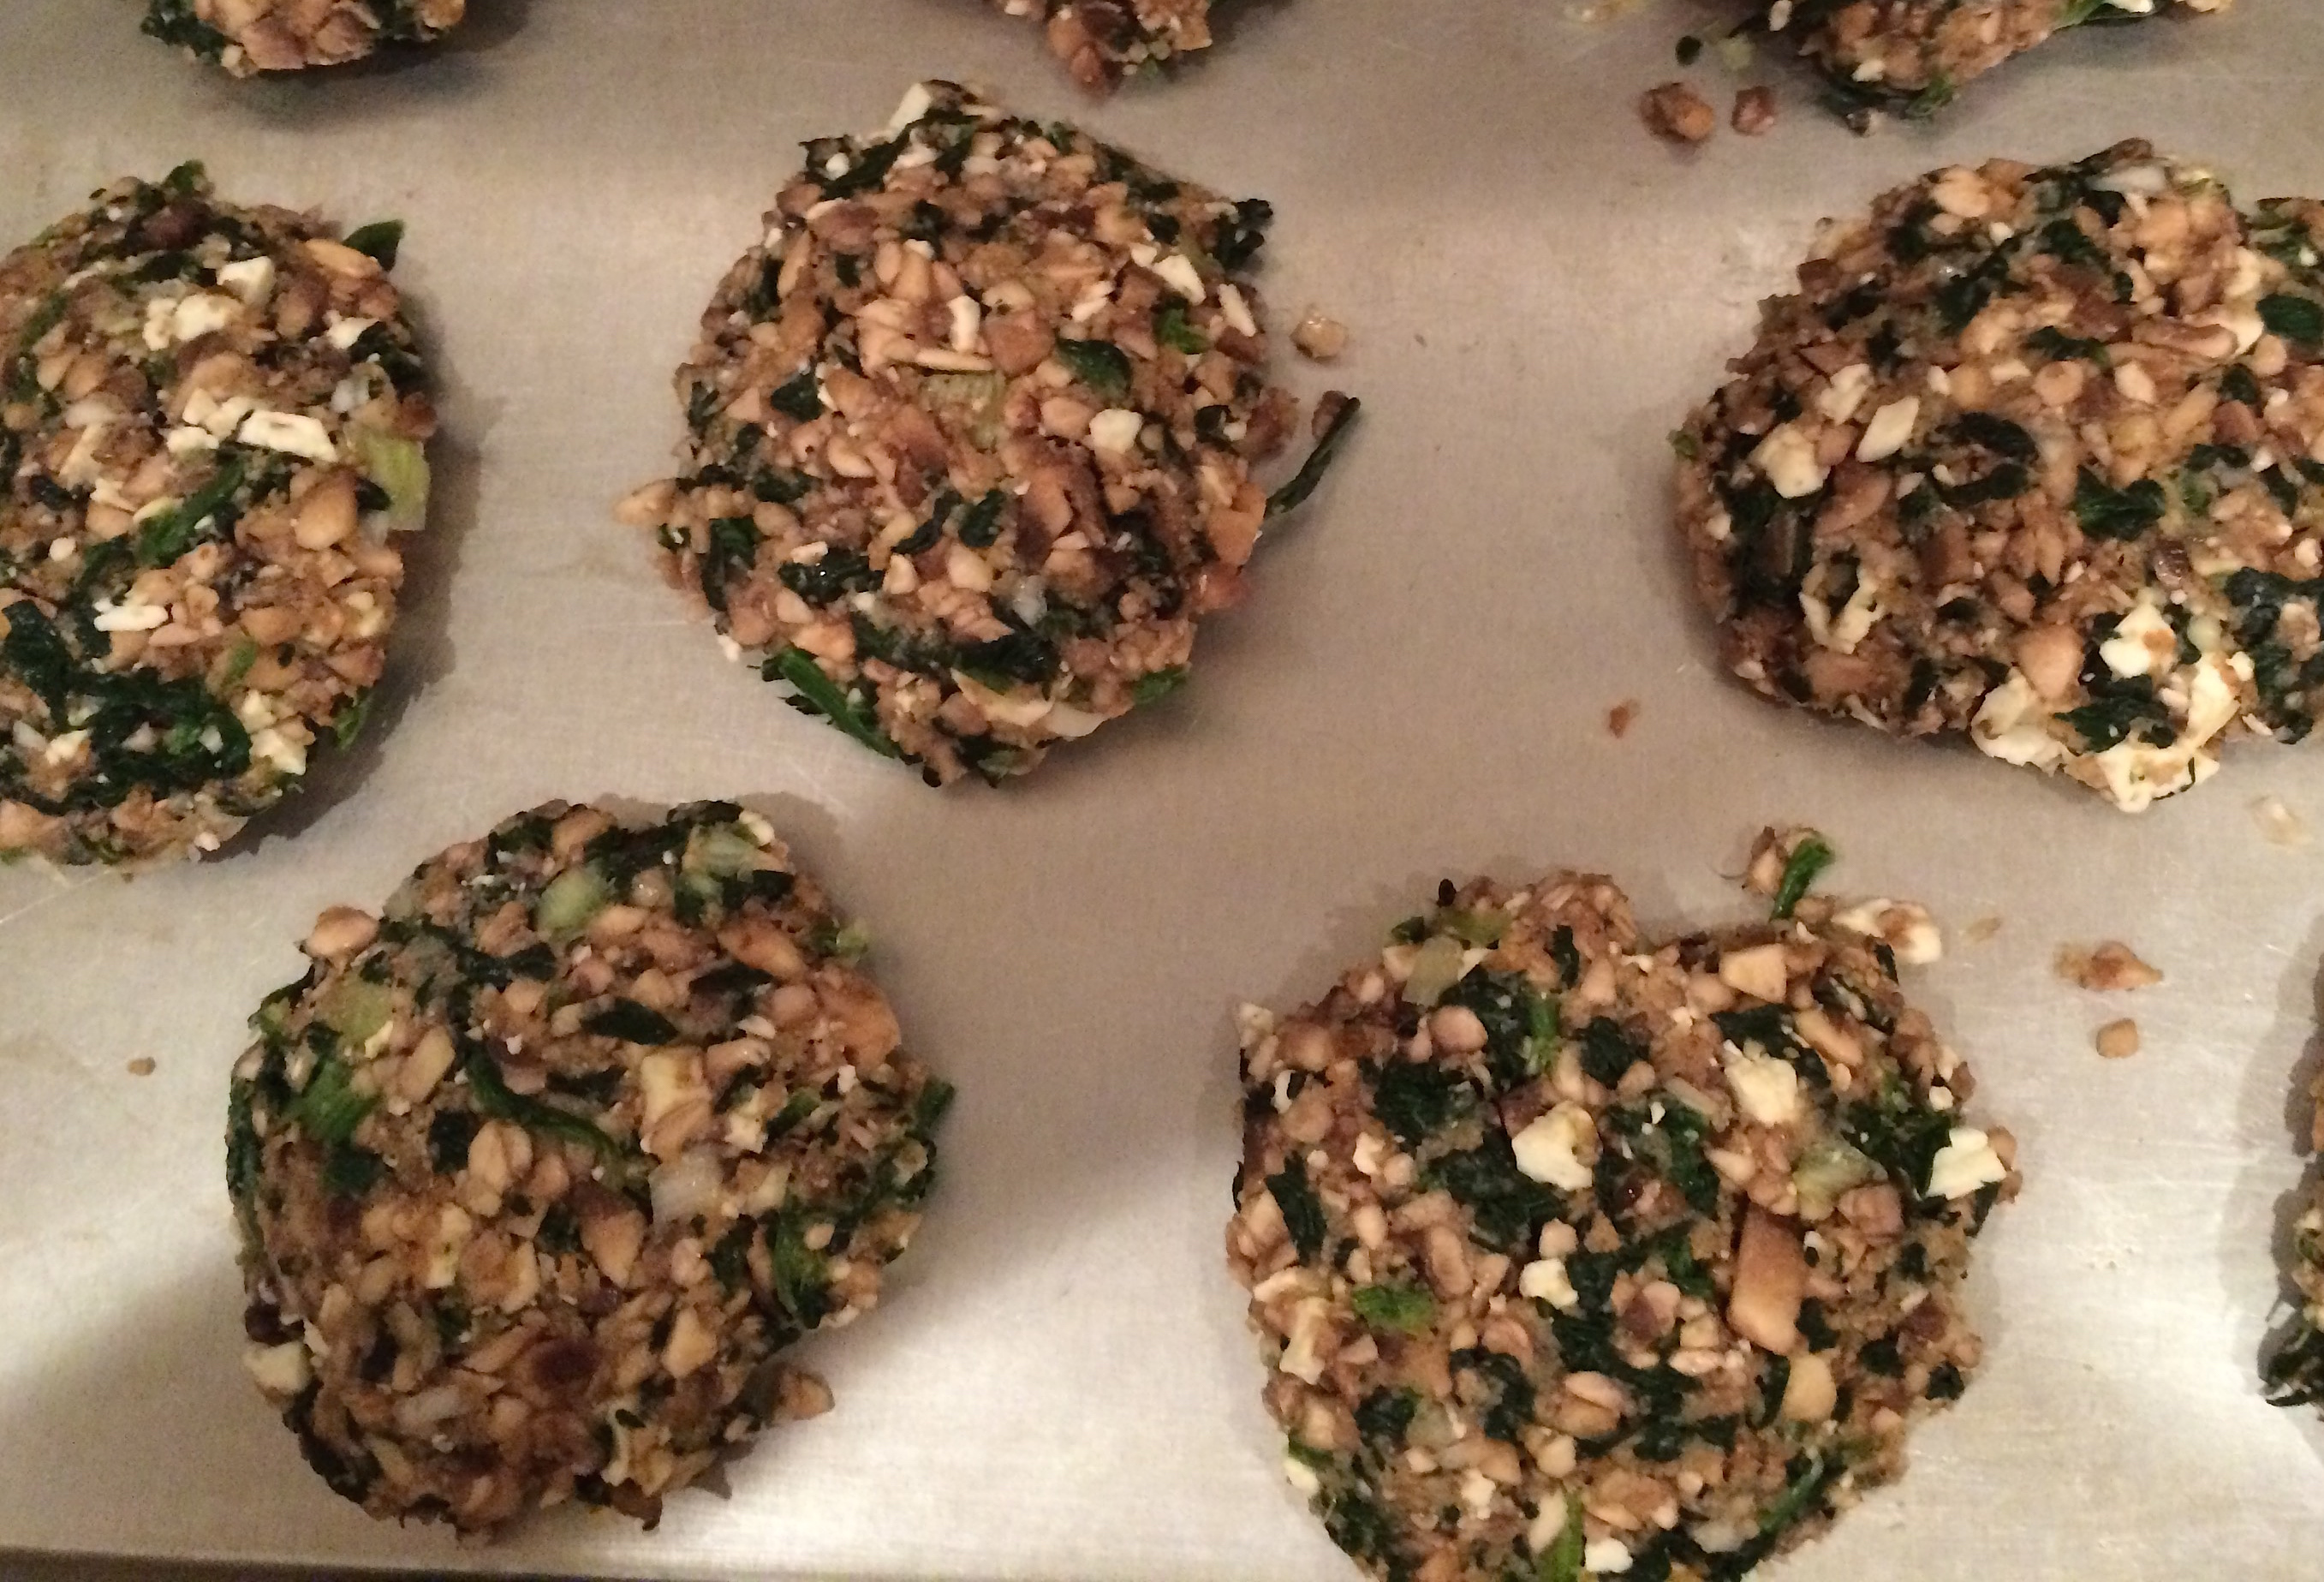 Uncooked Spinach, Mushroom and Feta patties on baking sheetIMG_2124